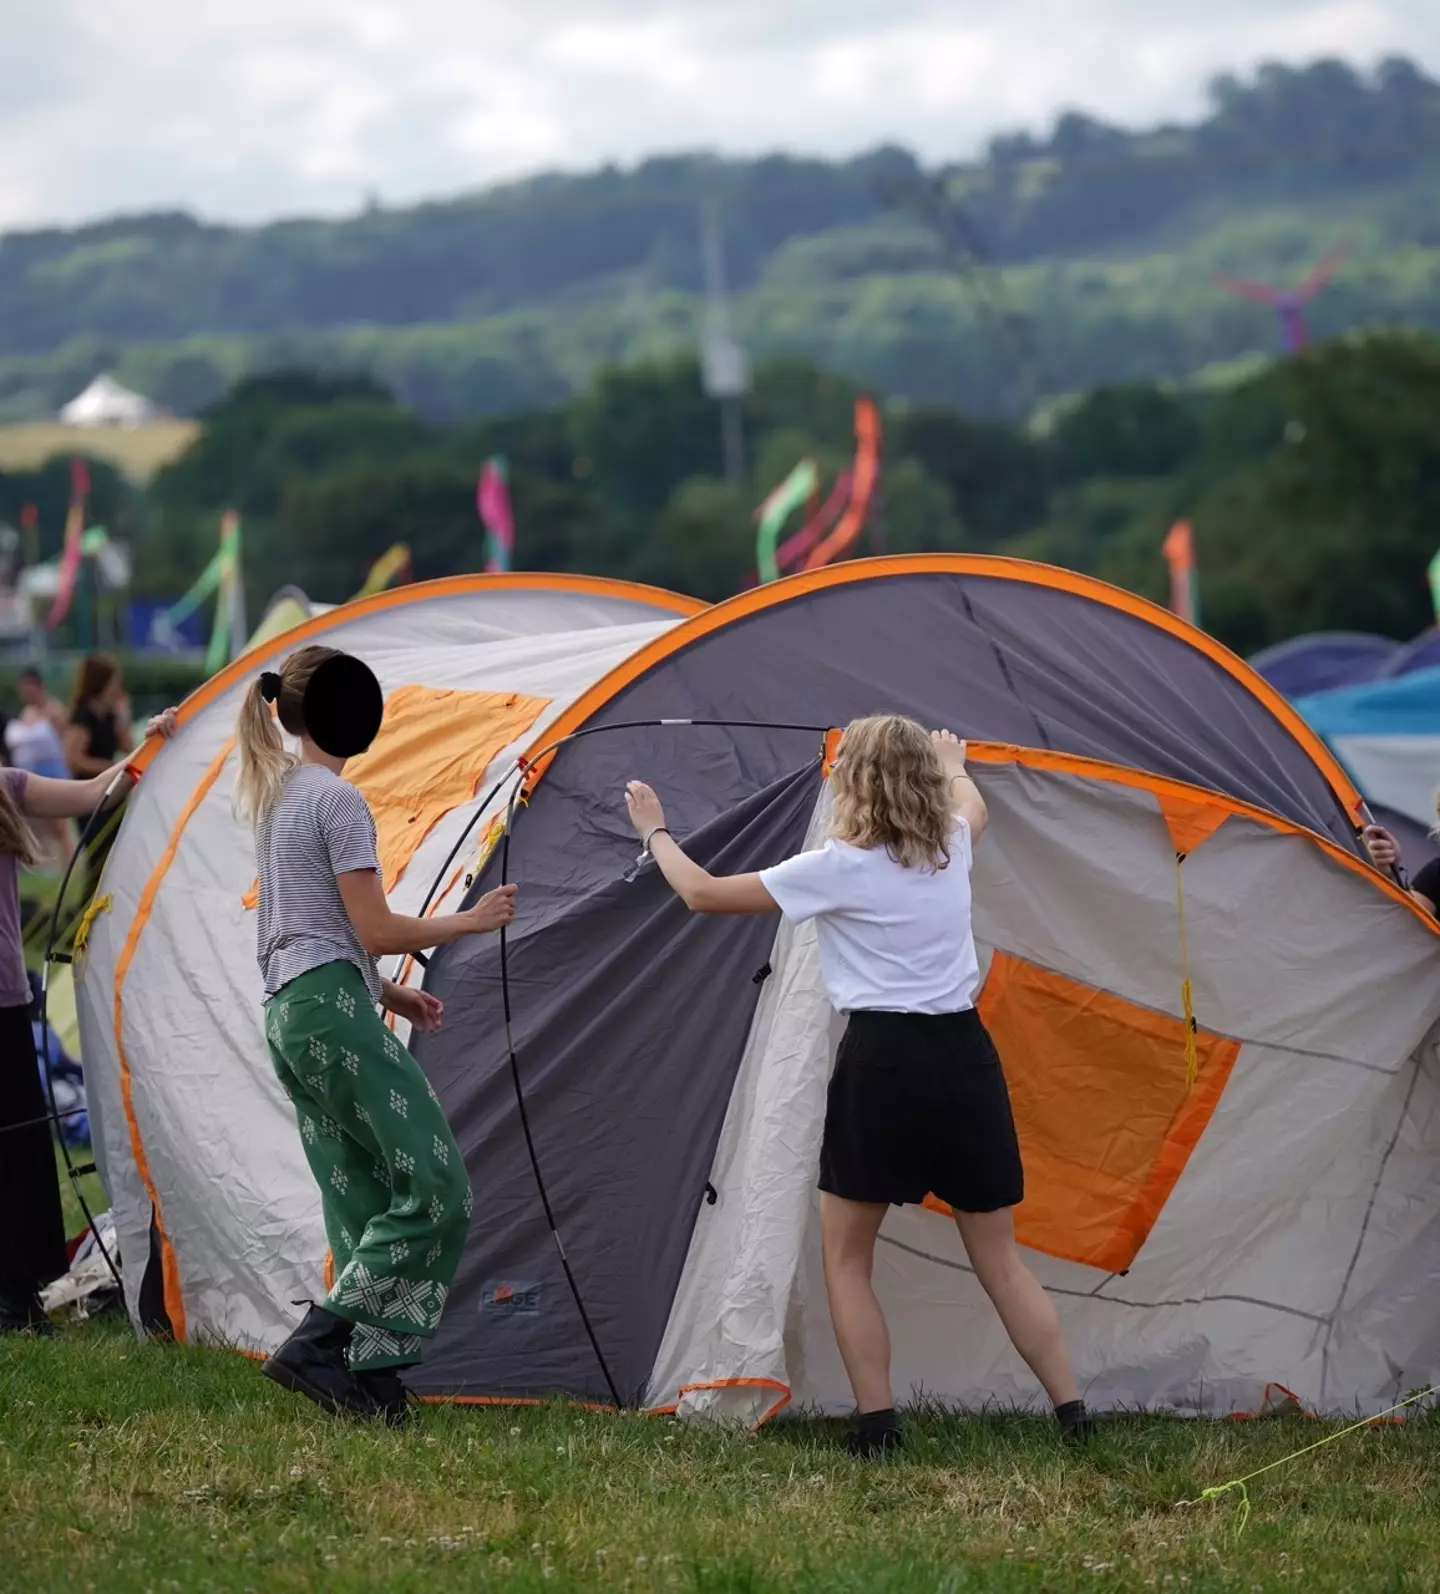 A Glastonbury local has hit out at festival-goers for pooing in their garden.